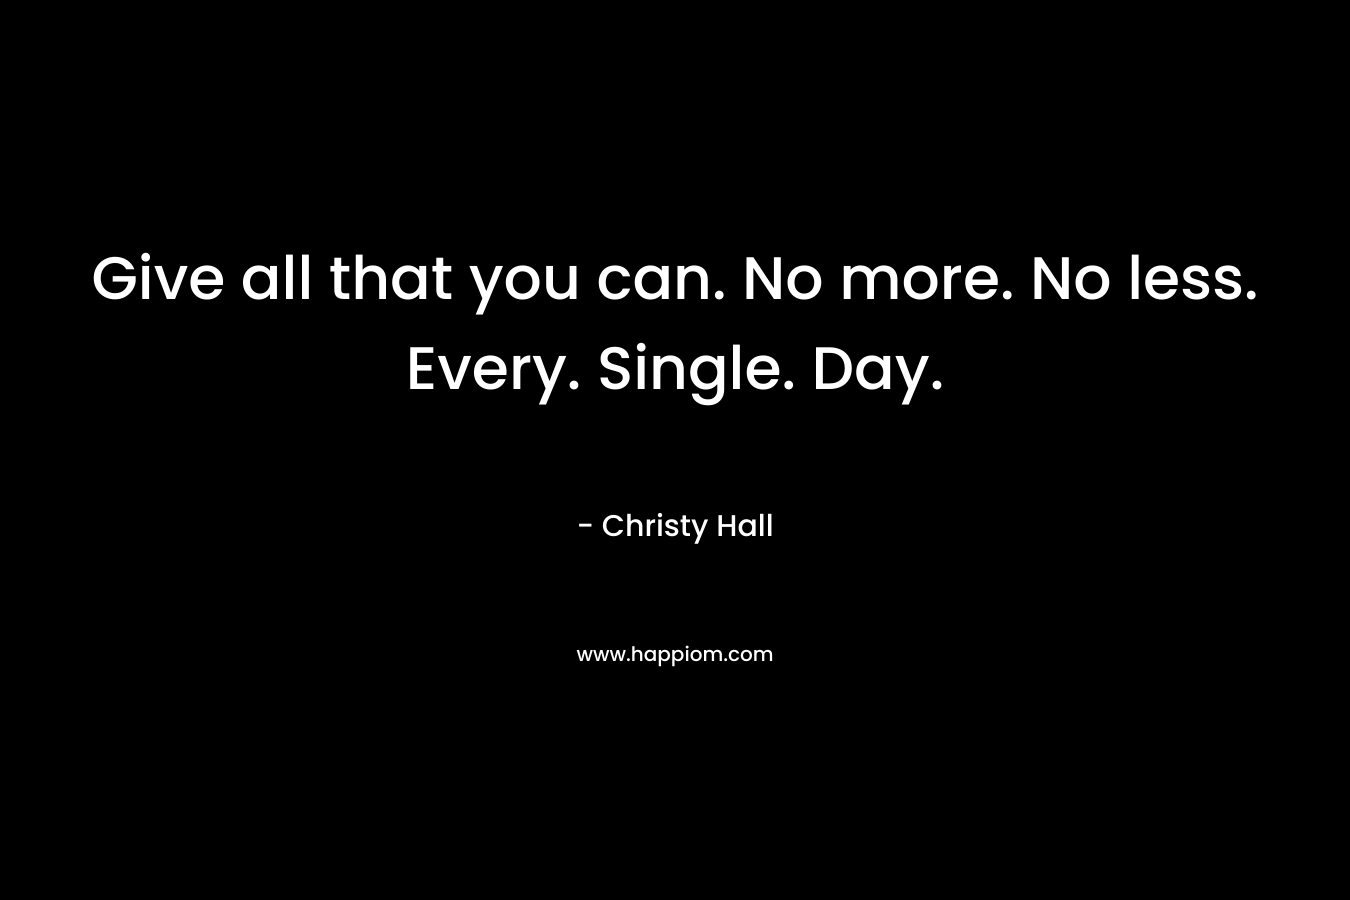 Give all that you can. No more. No less. Every. Single. Day.